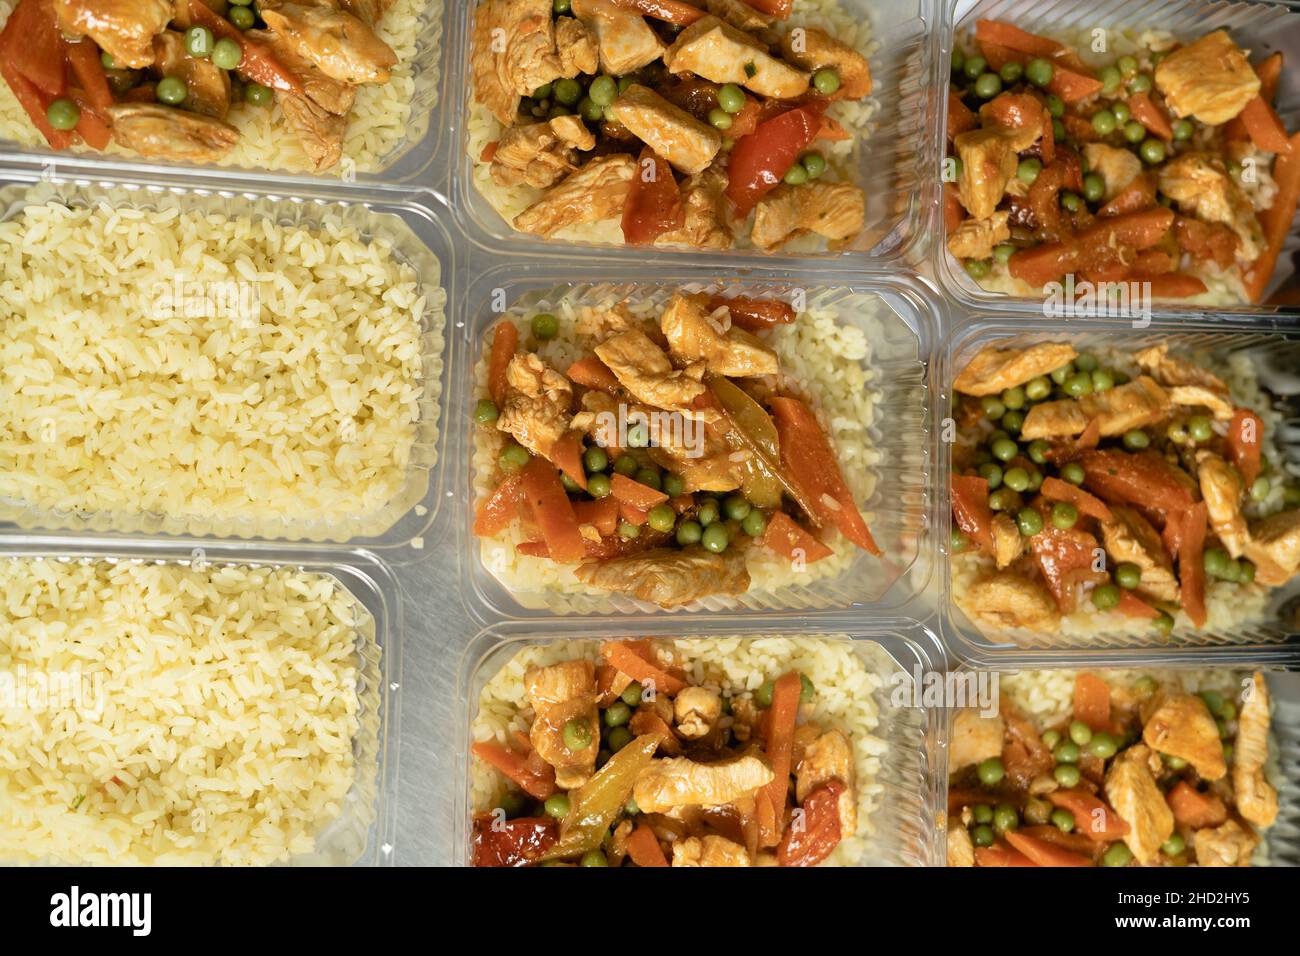 food delivery in the restaurant. Business lunch in an eco-friendly plastic container, ready for delivery. View from above. Office Lunch boxes with Stock Photo